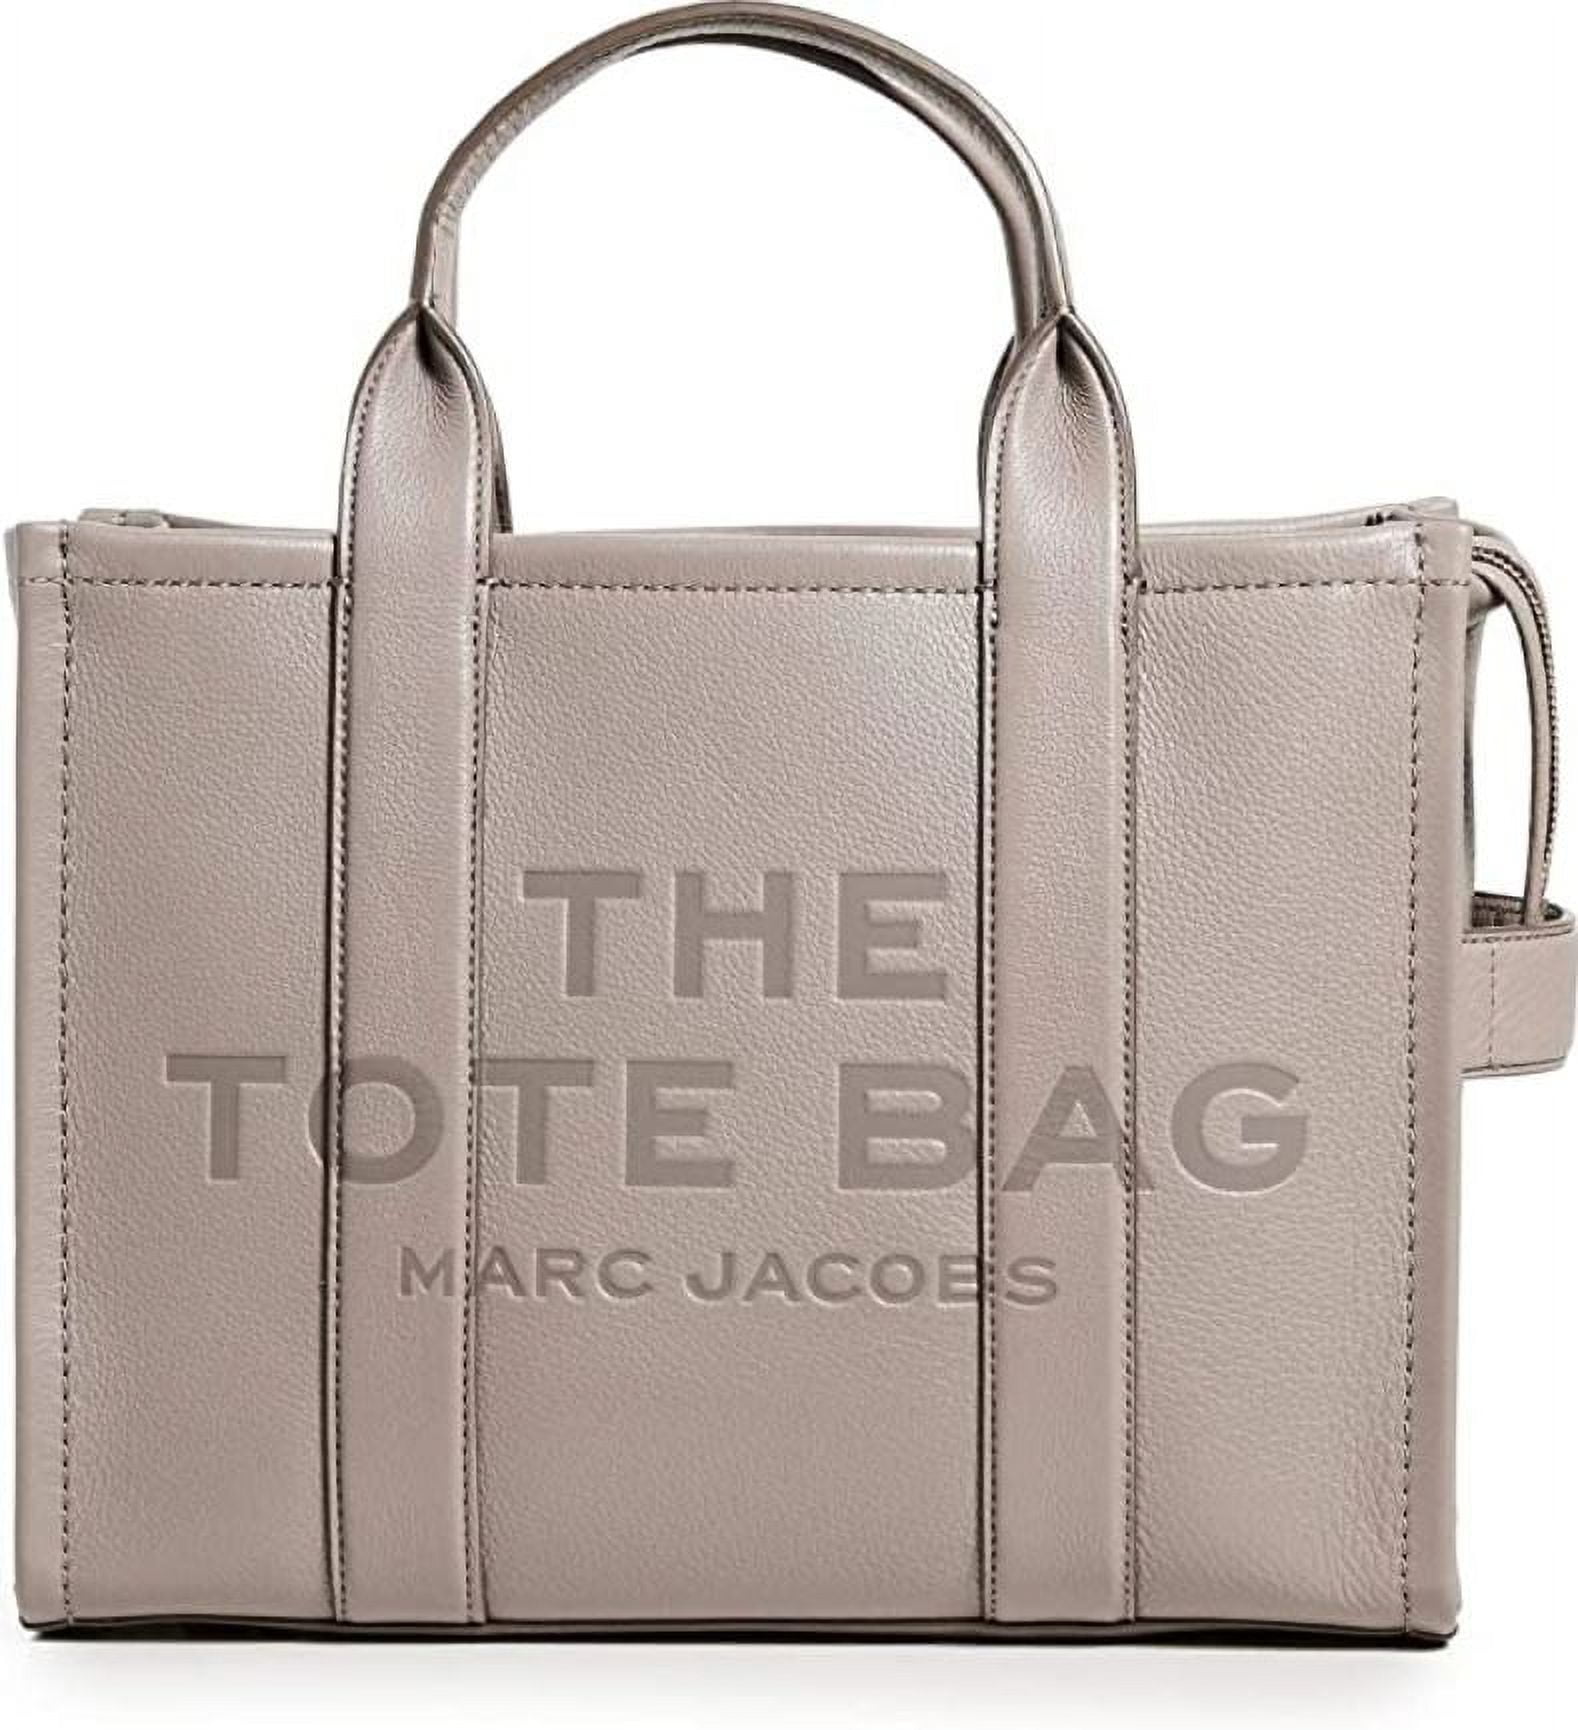  Marc Jacobs The Mini Tote Beige Multi One Size